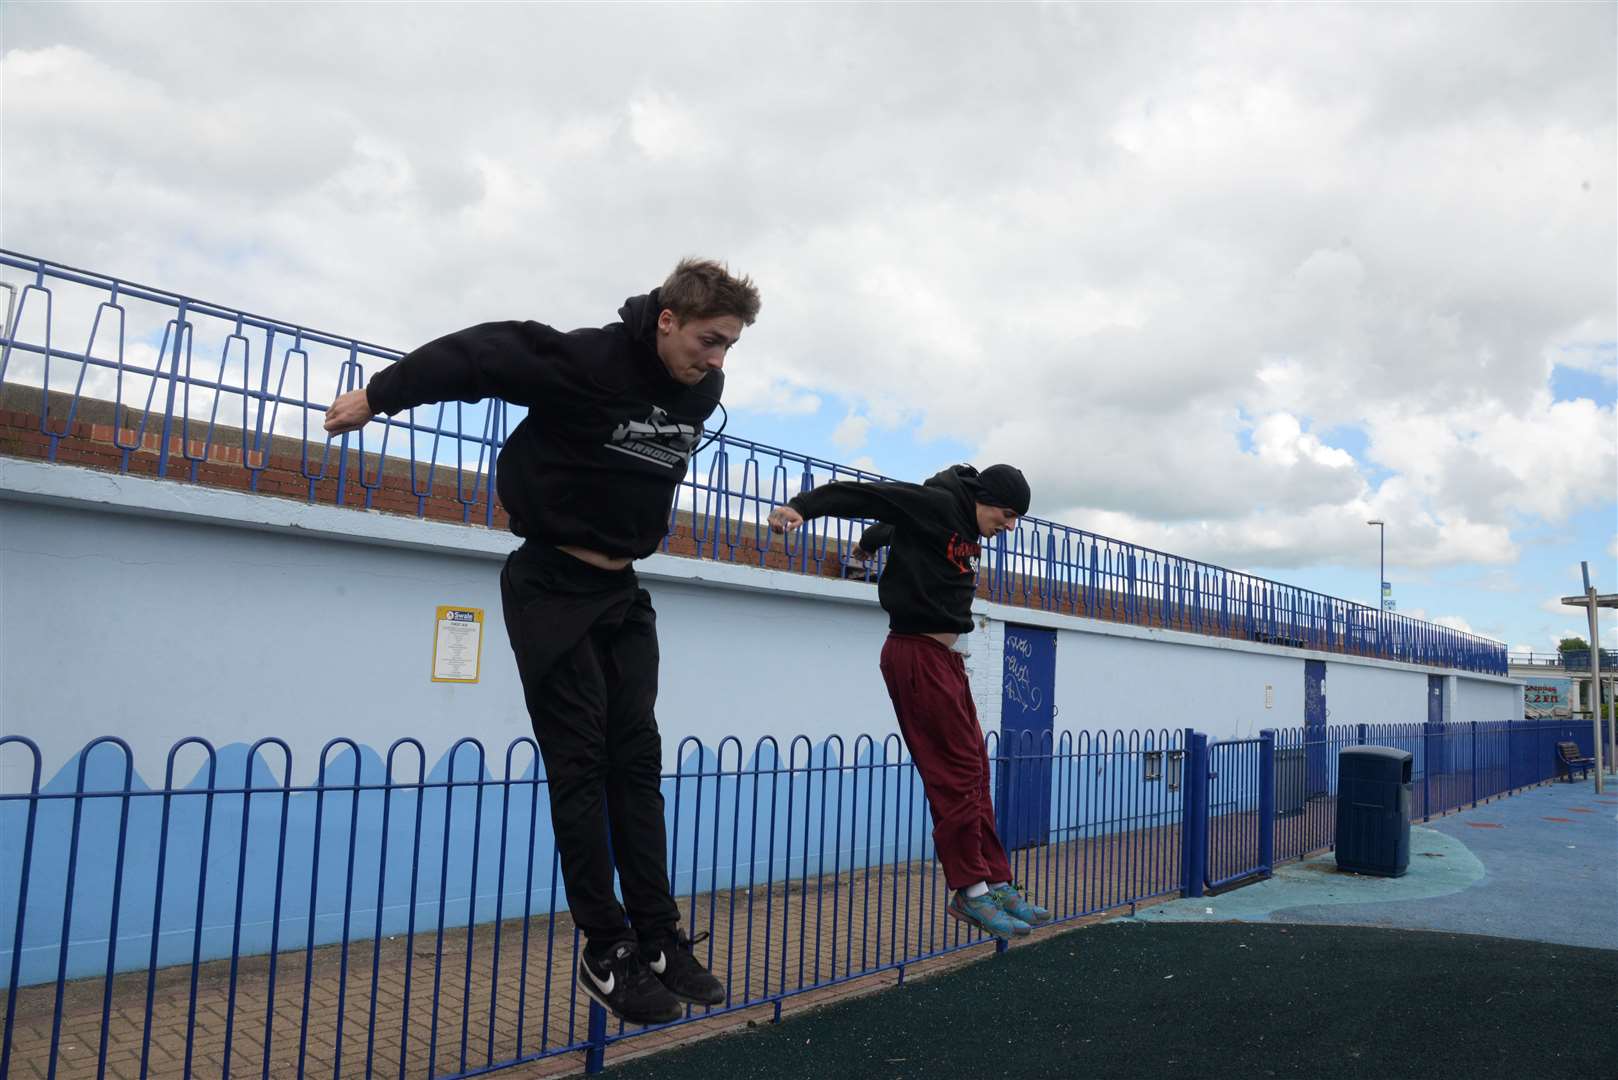 Parkour coach Adam McKenna and John-Daniel Scullion jump from the promenade into the skate park. Picture: Chris Davey